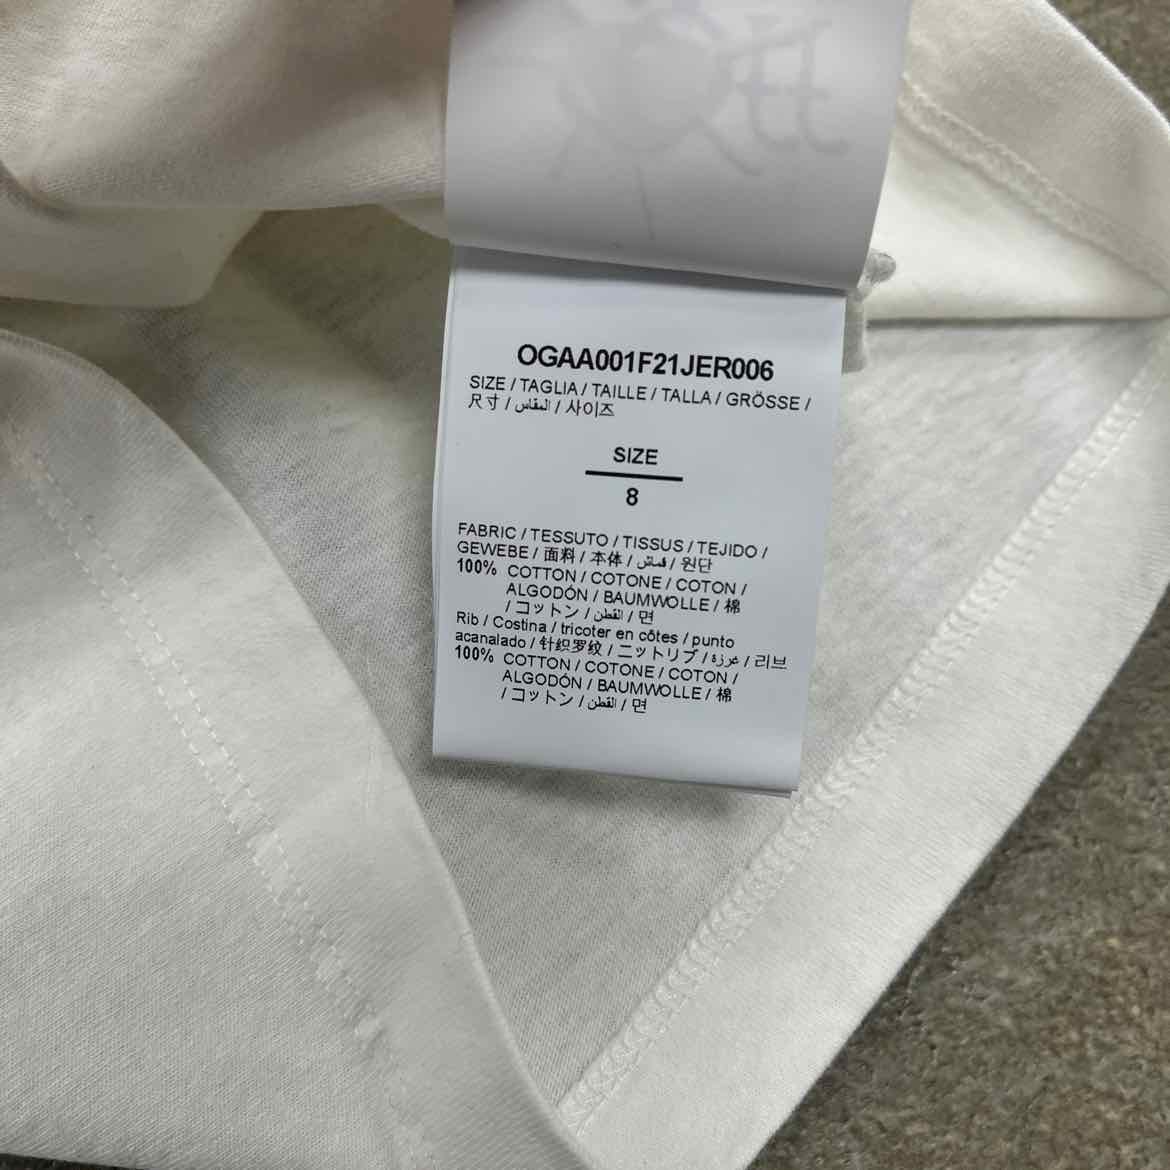 OFF-WHITE T-Shirt "LILAC" White New Size 8